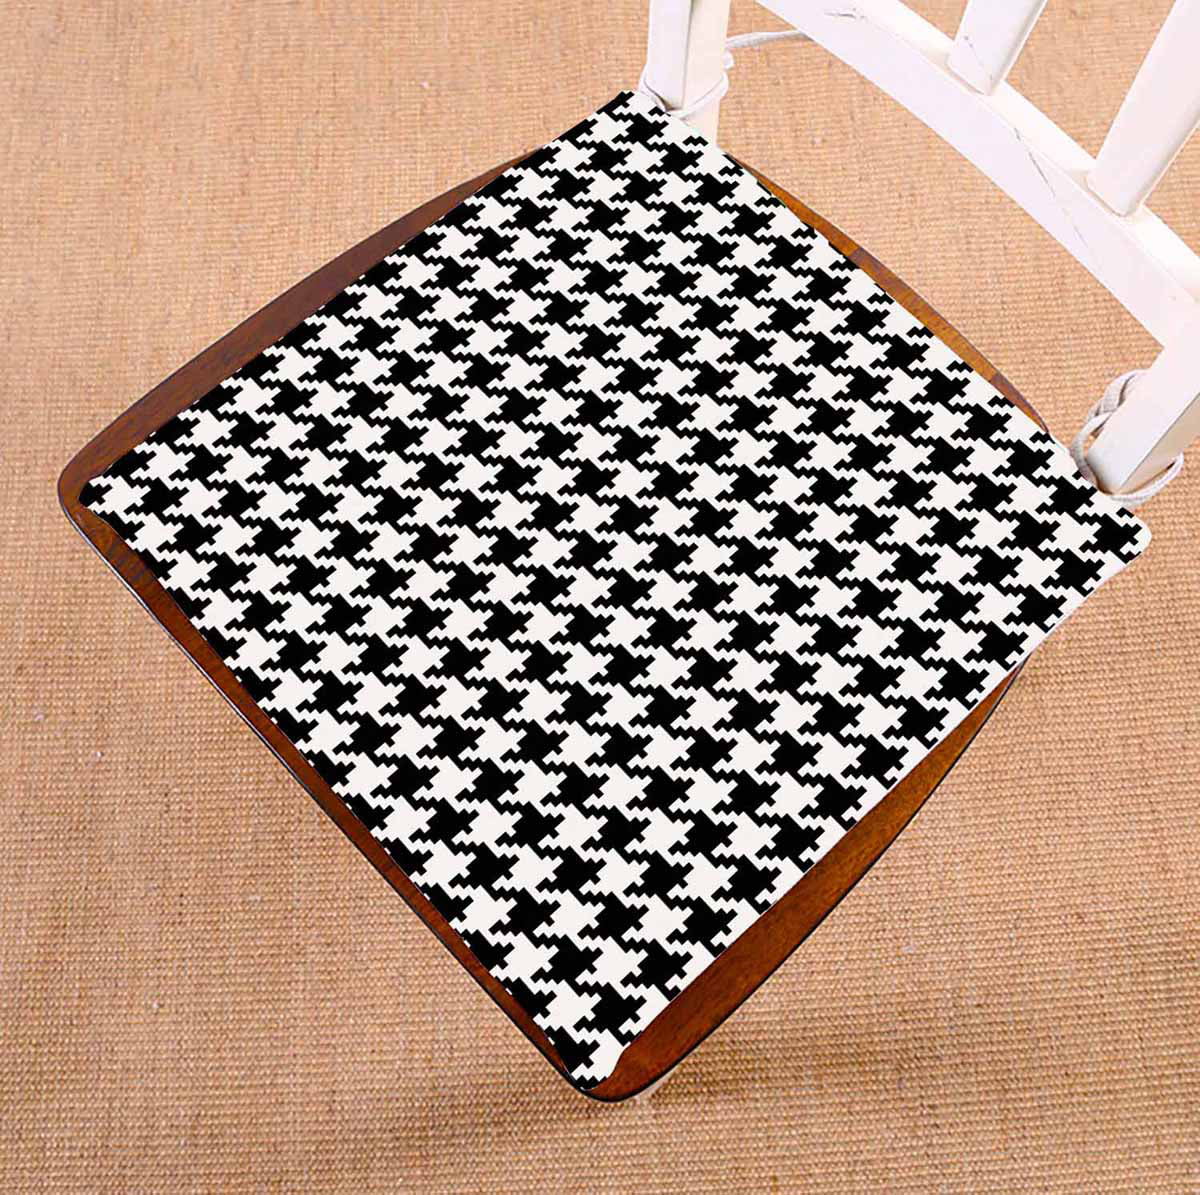 PKQWTM Black And White Houndstooth Pattern Chair Pads